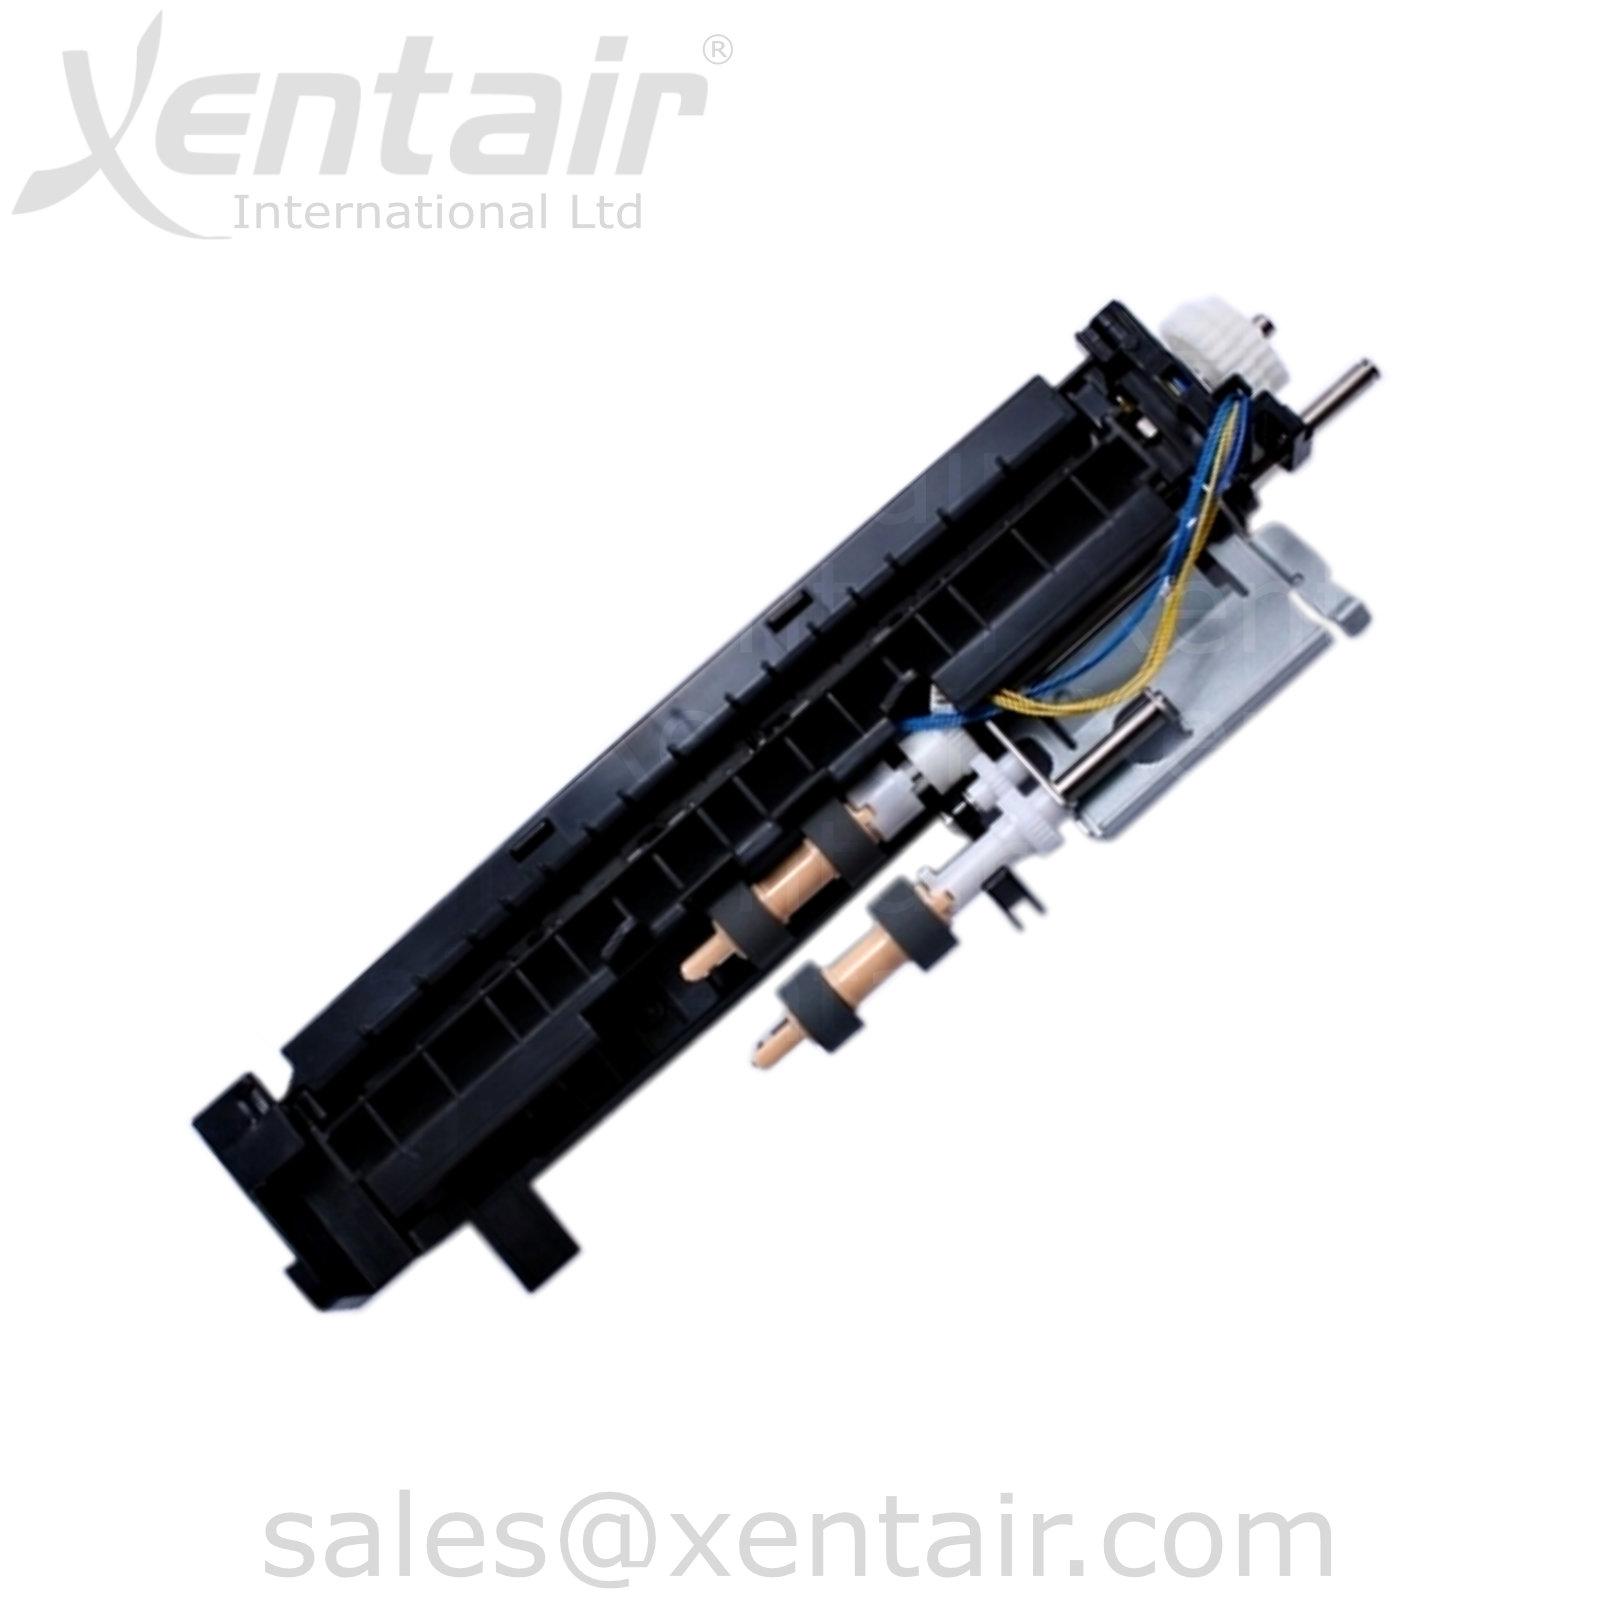 Xerox® Phaser™ 6600 WorkCentre™ 6605 VersaLink® C400 C405 Optional Feed Assembly 059K71760 059K86170